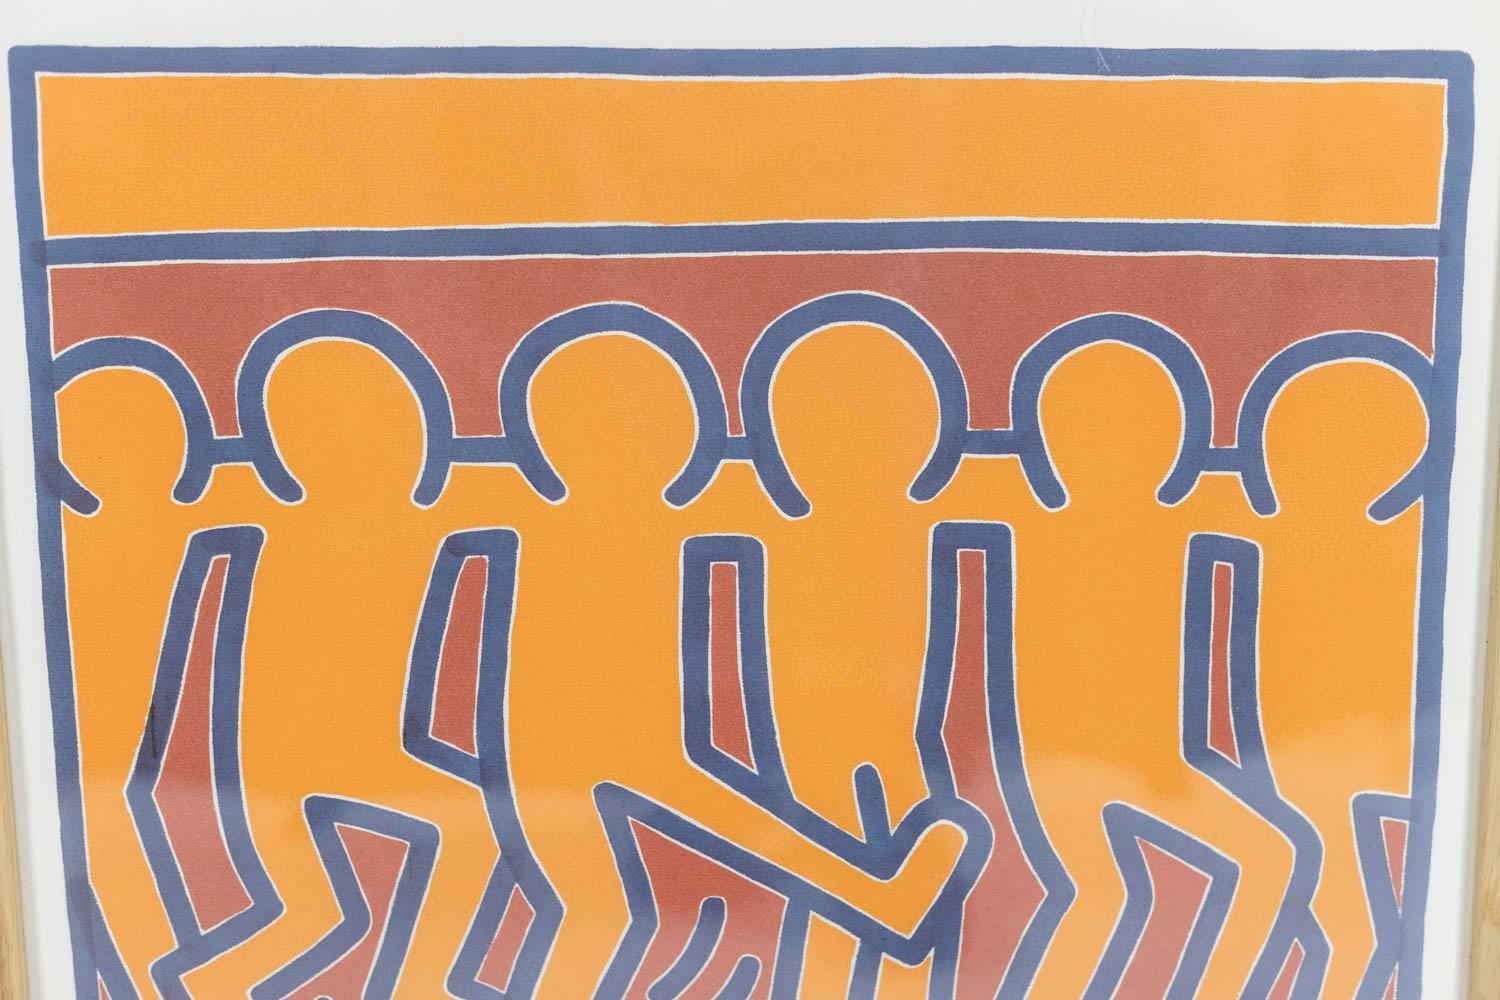 Keith Haring, signed and numbered.

Lithography representing schematic characters, in shades of orange, red and blue, in its blond oak frame.

Numbered 16/150.

American work realized in the 1990s.